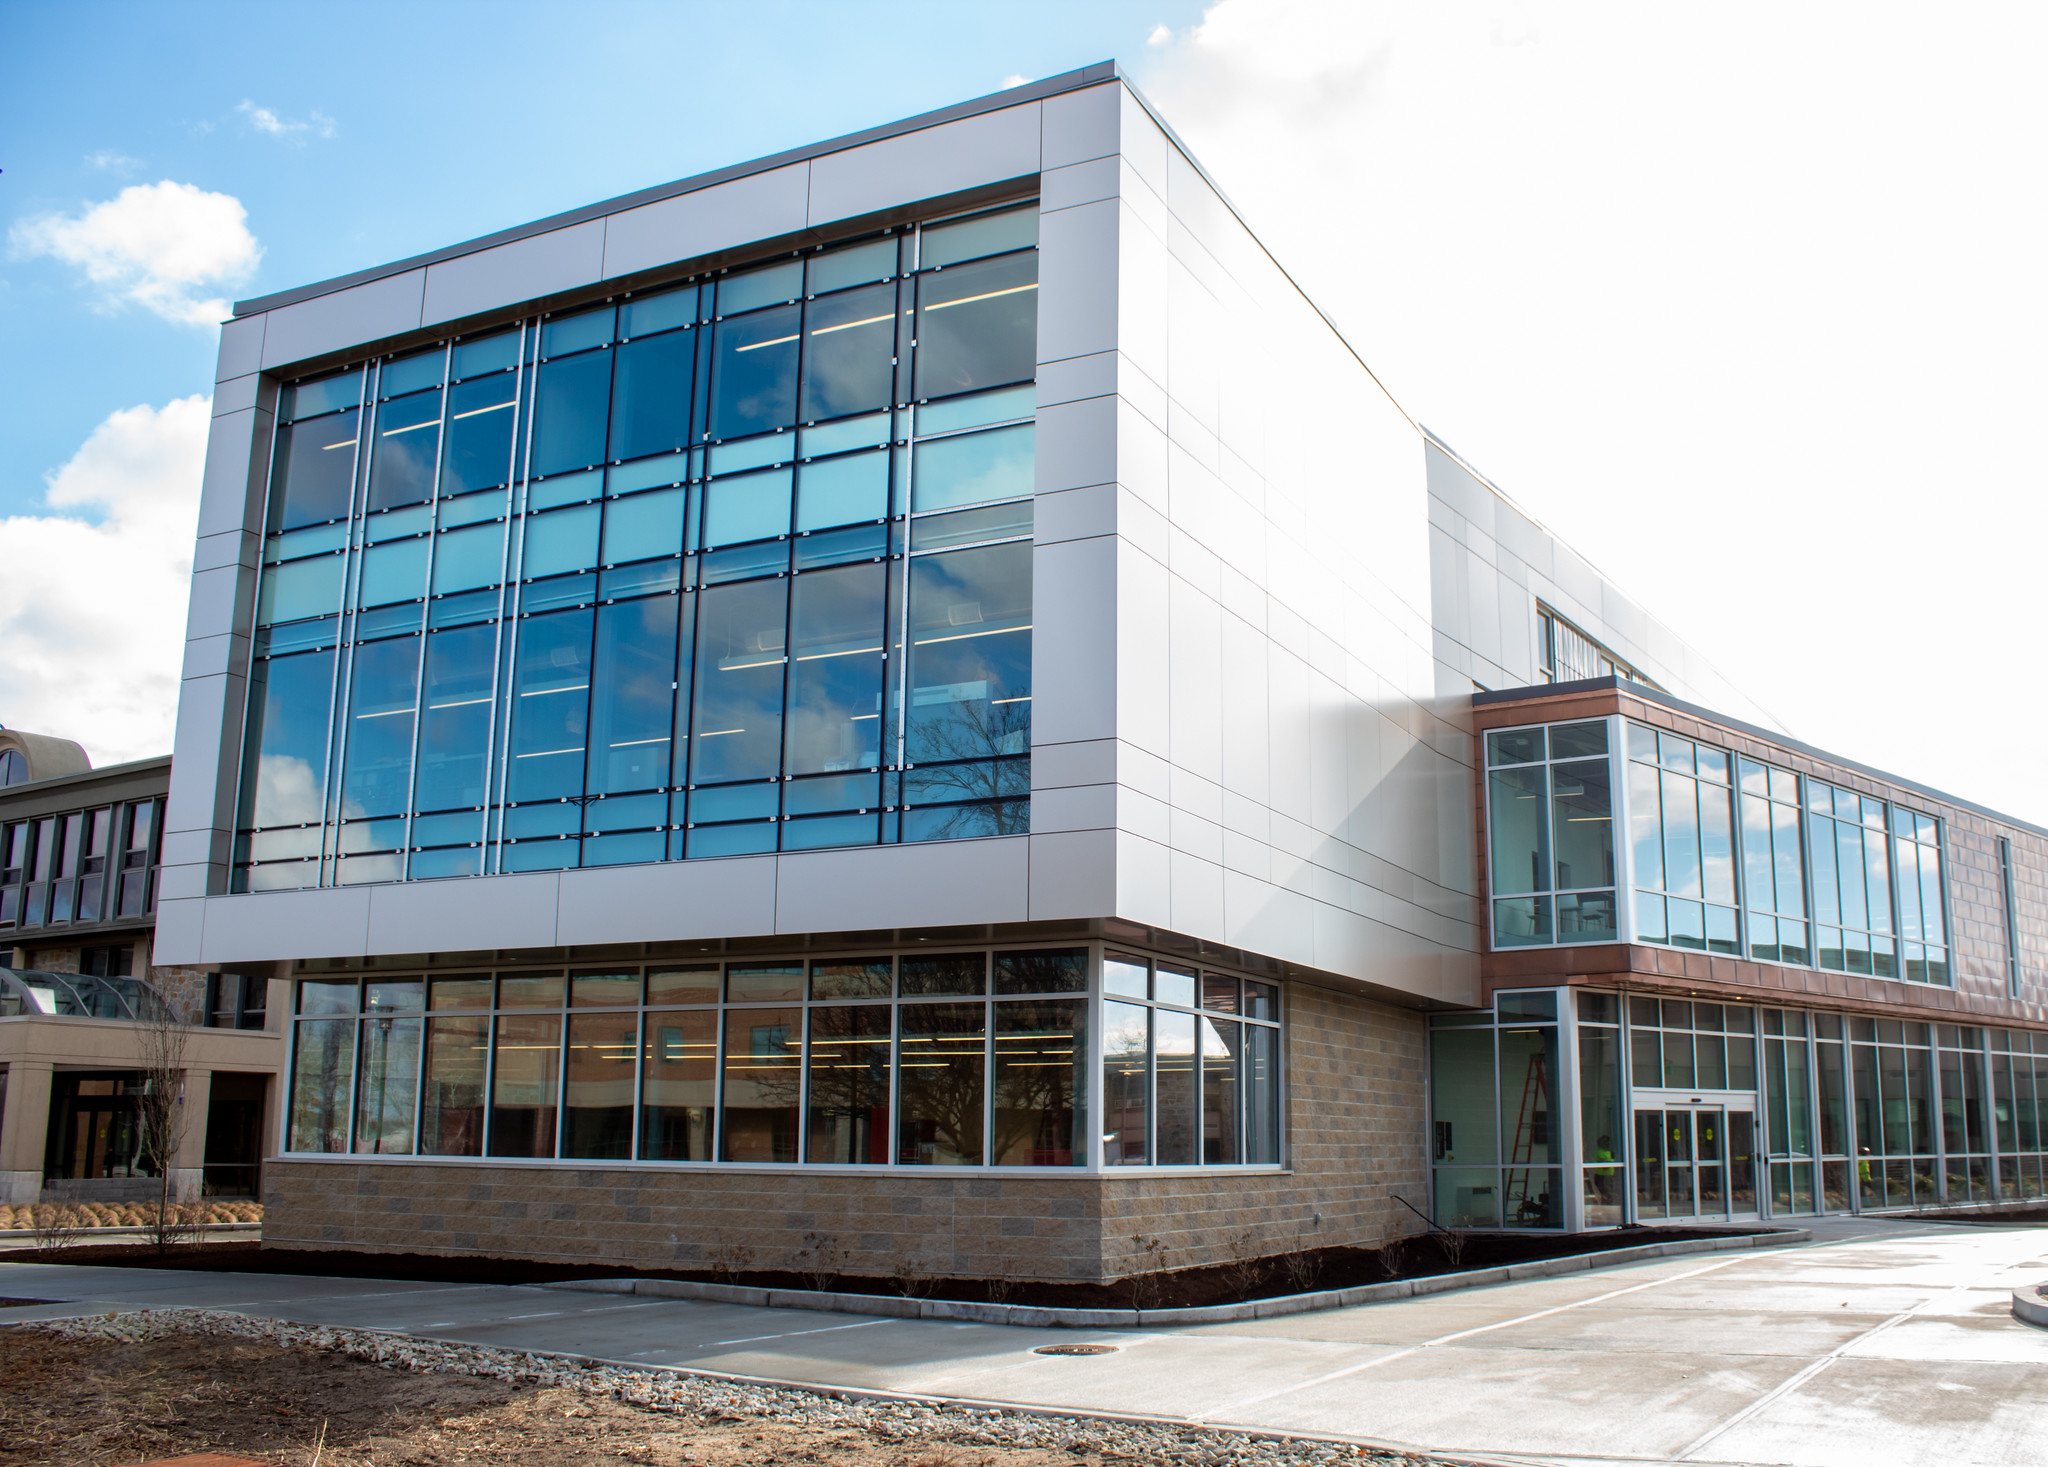 RWU's new engineering and construction management lab building to open